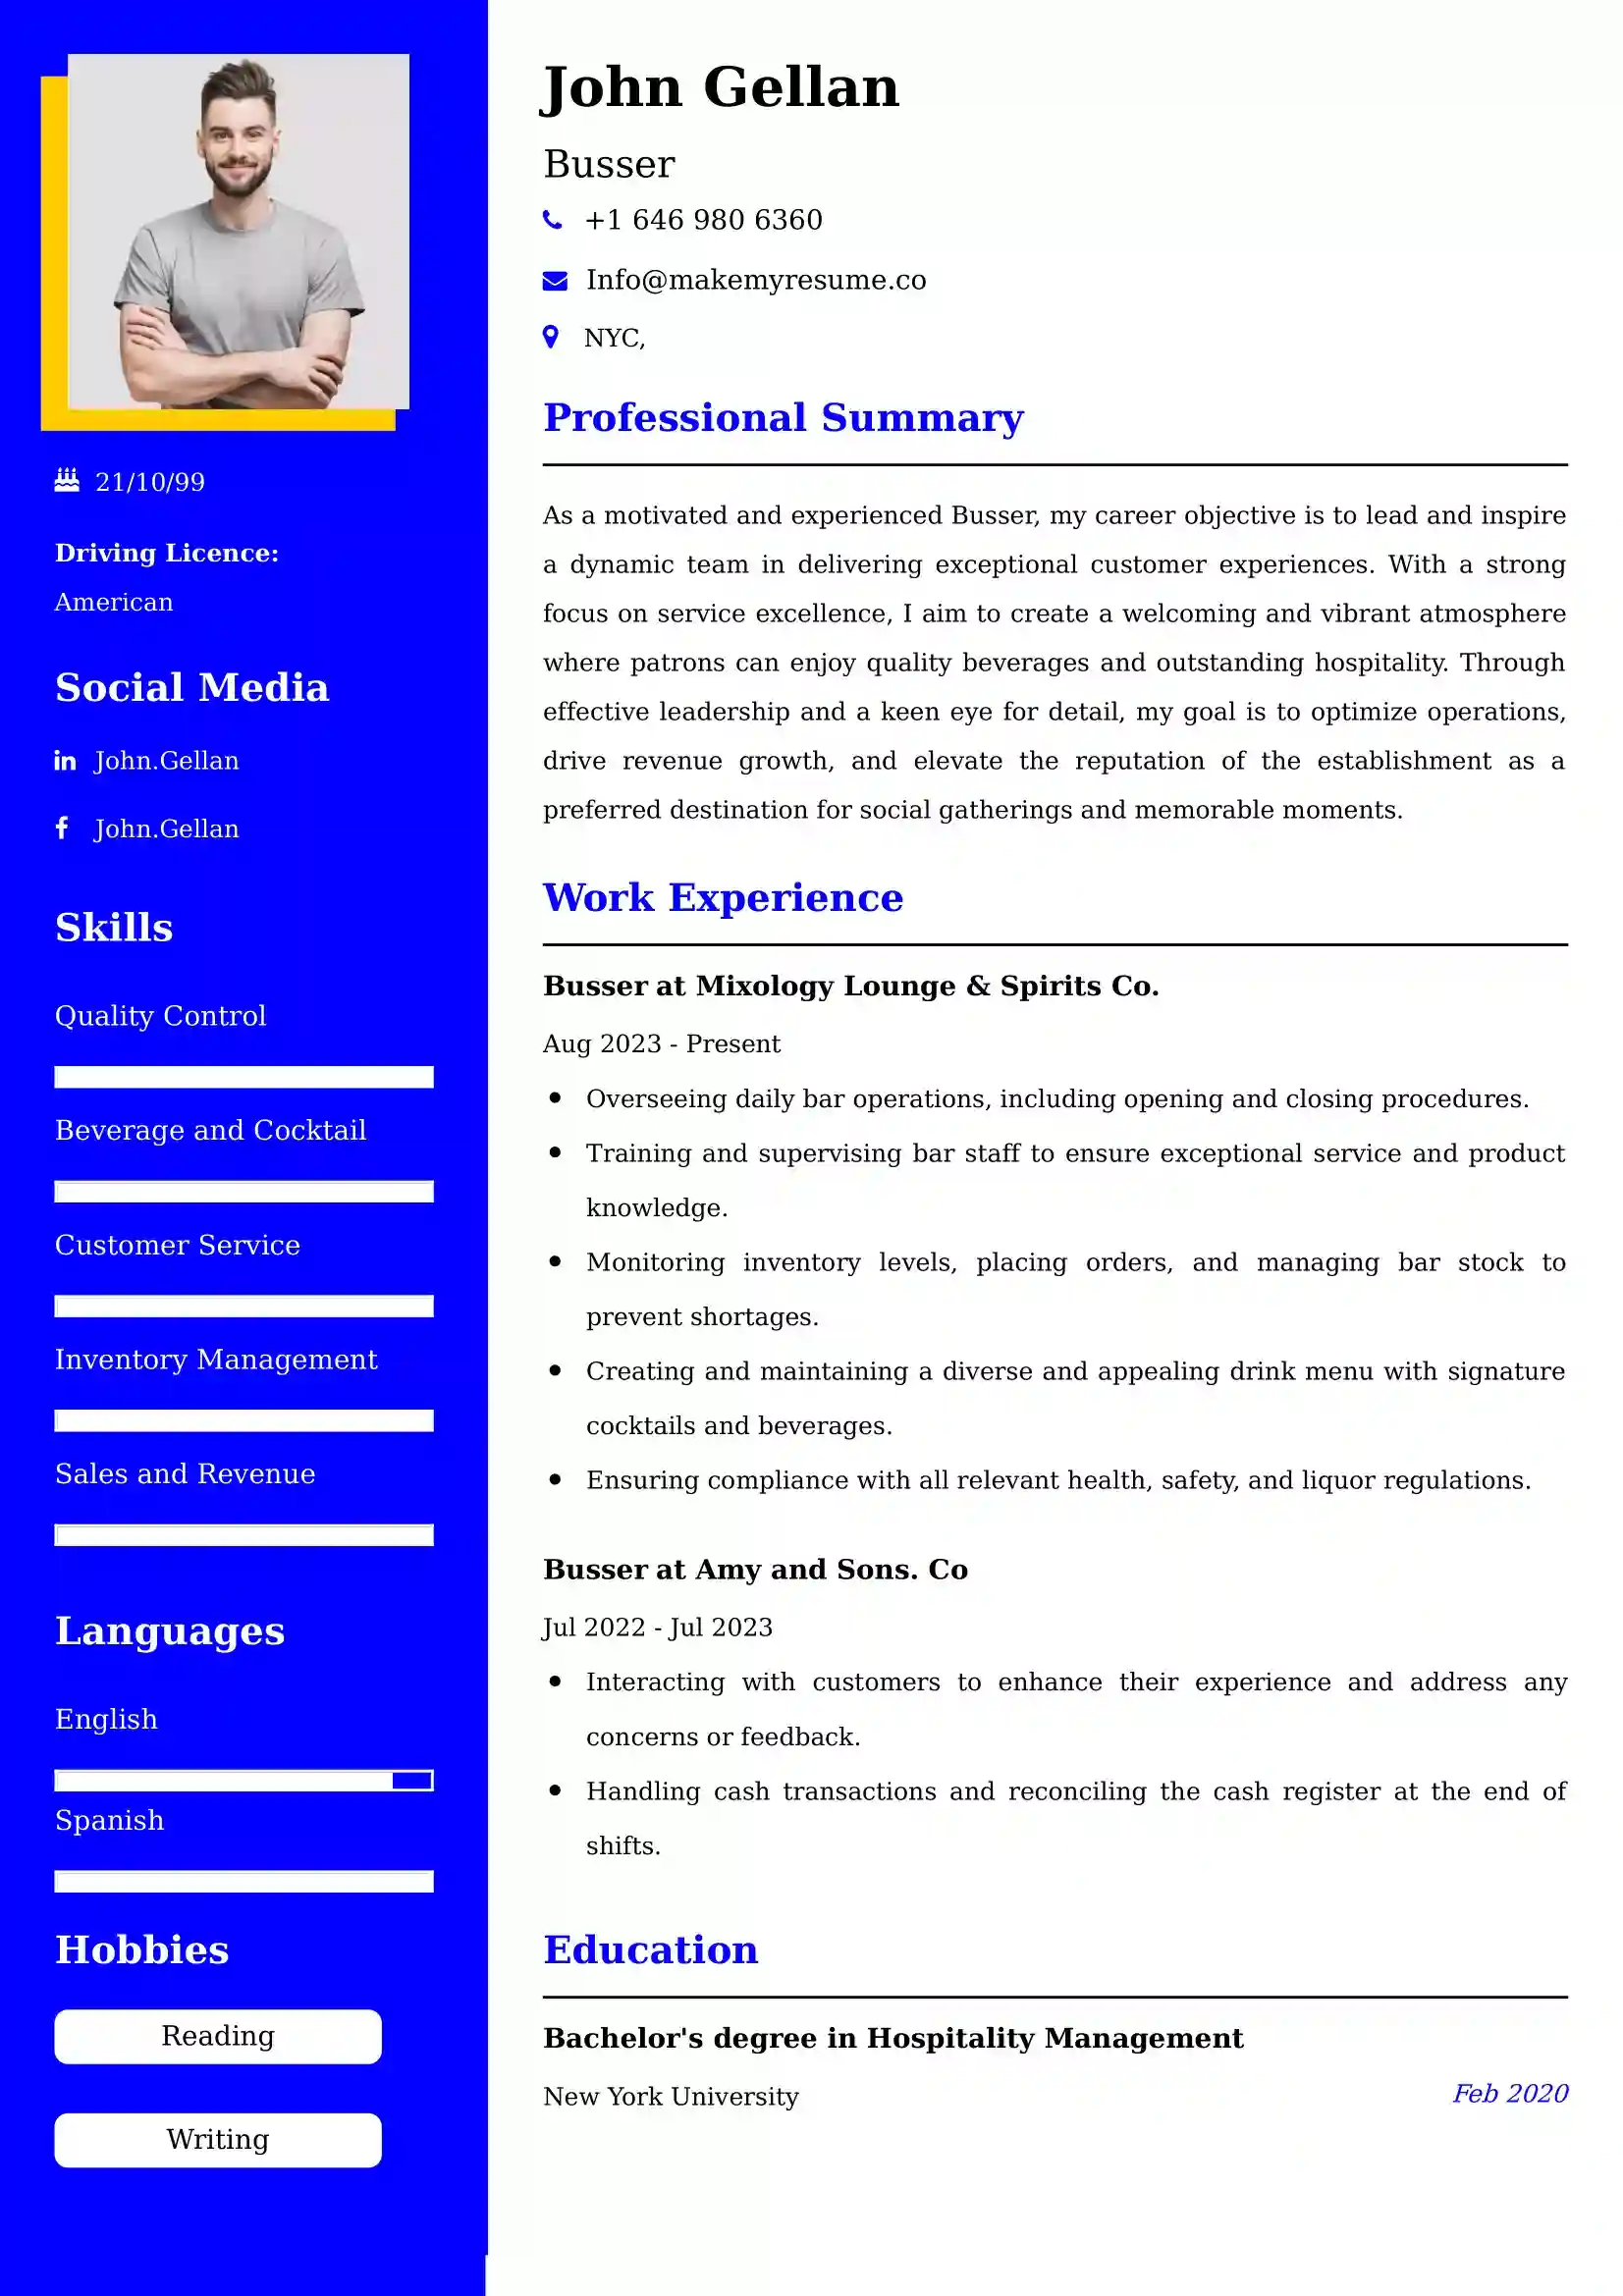 Busser Resume Examples - UK Format, Latest Template.